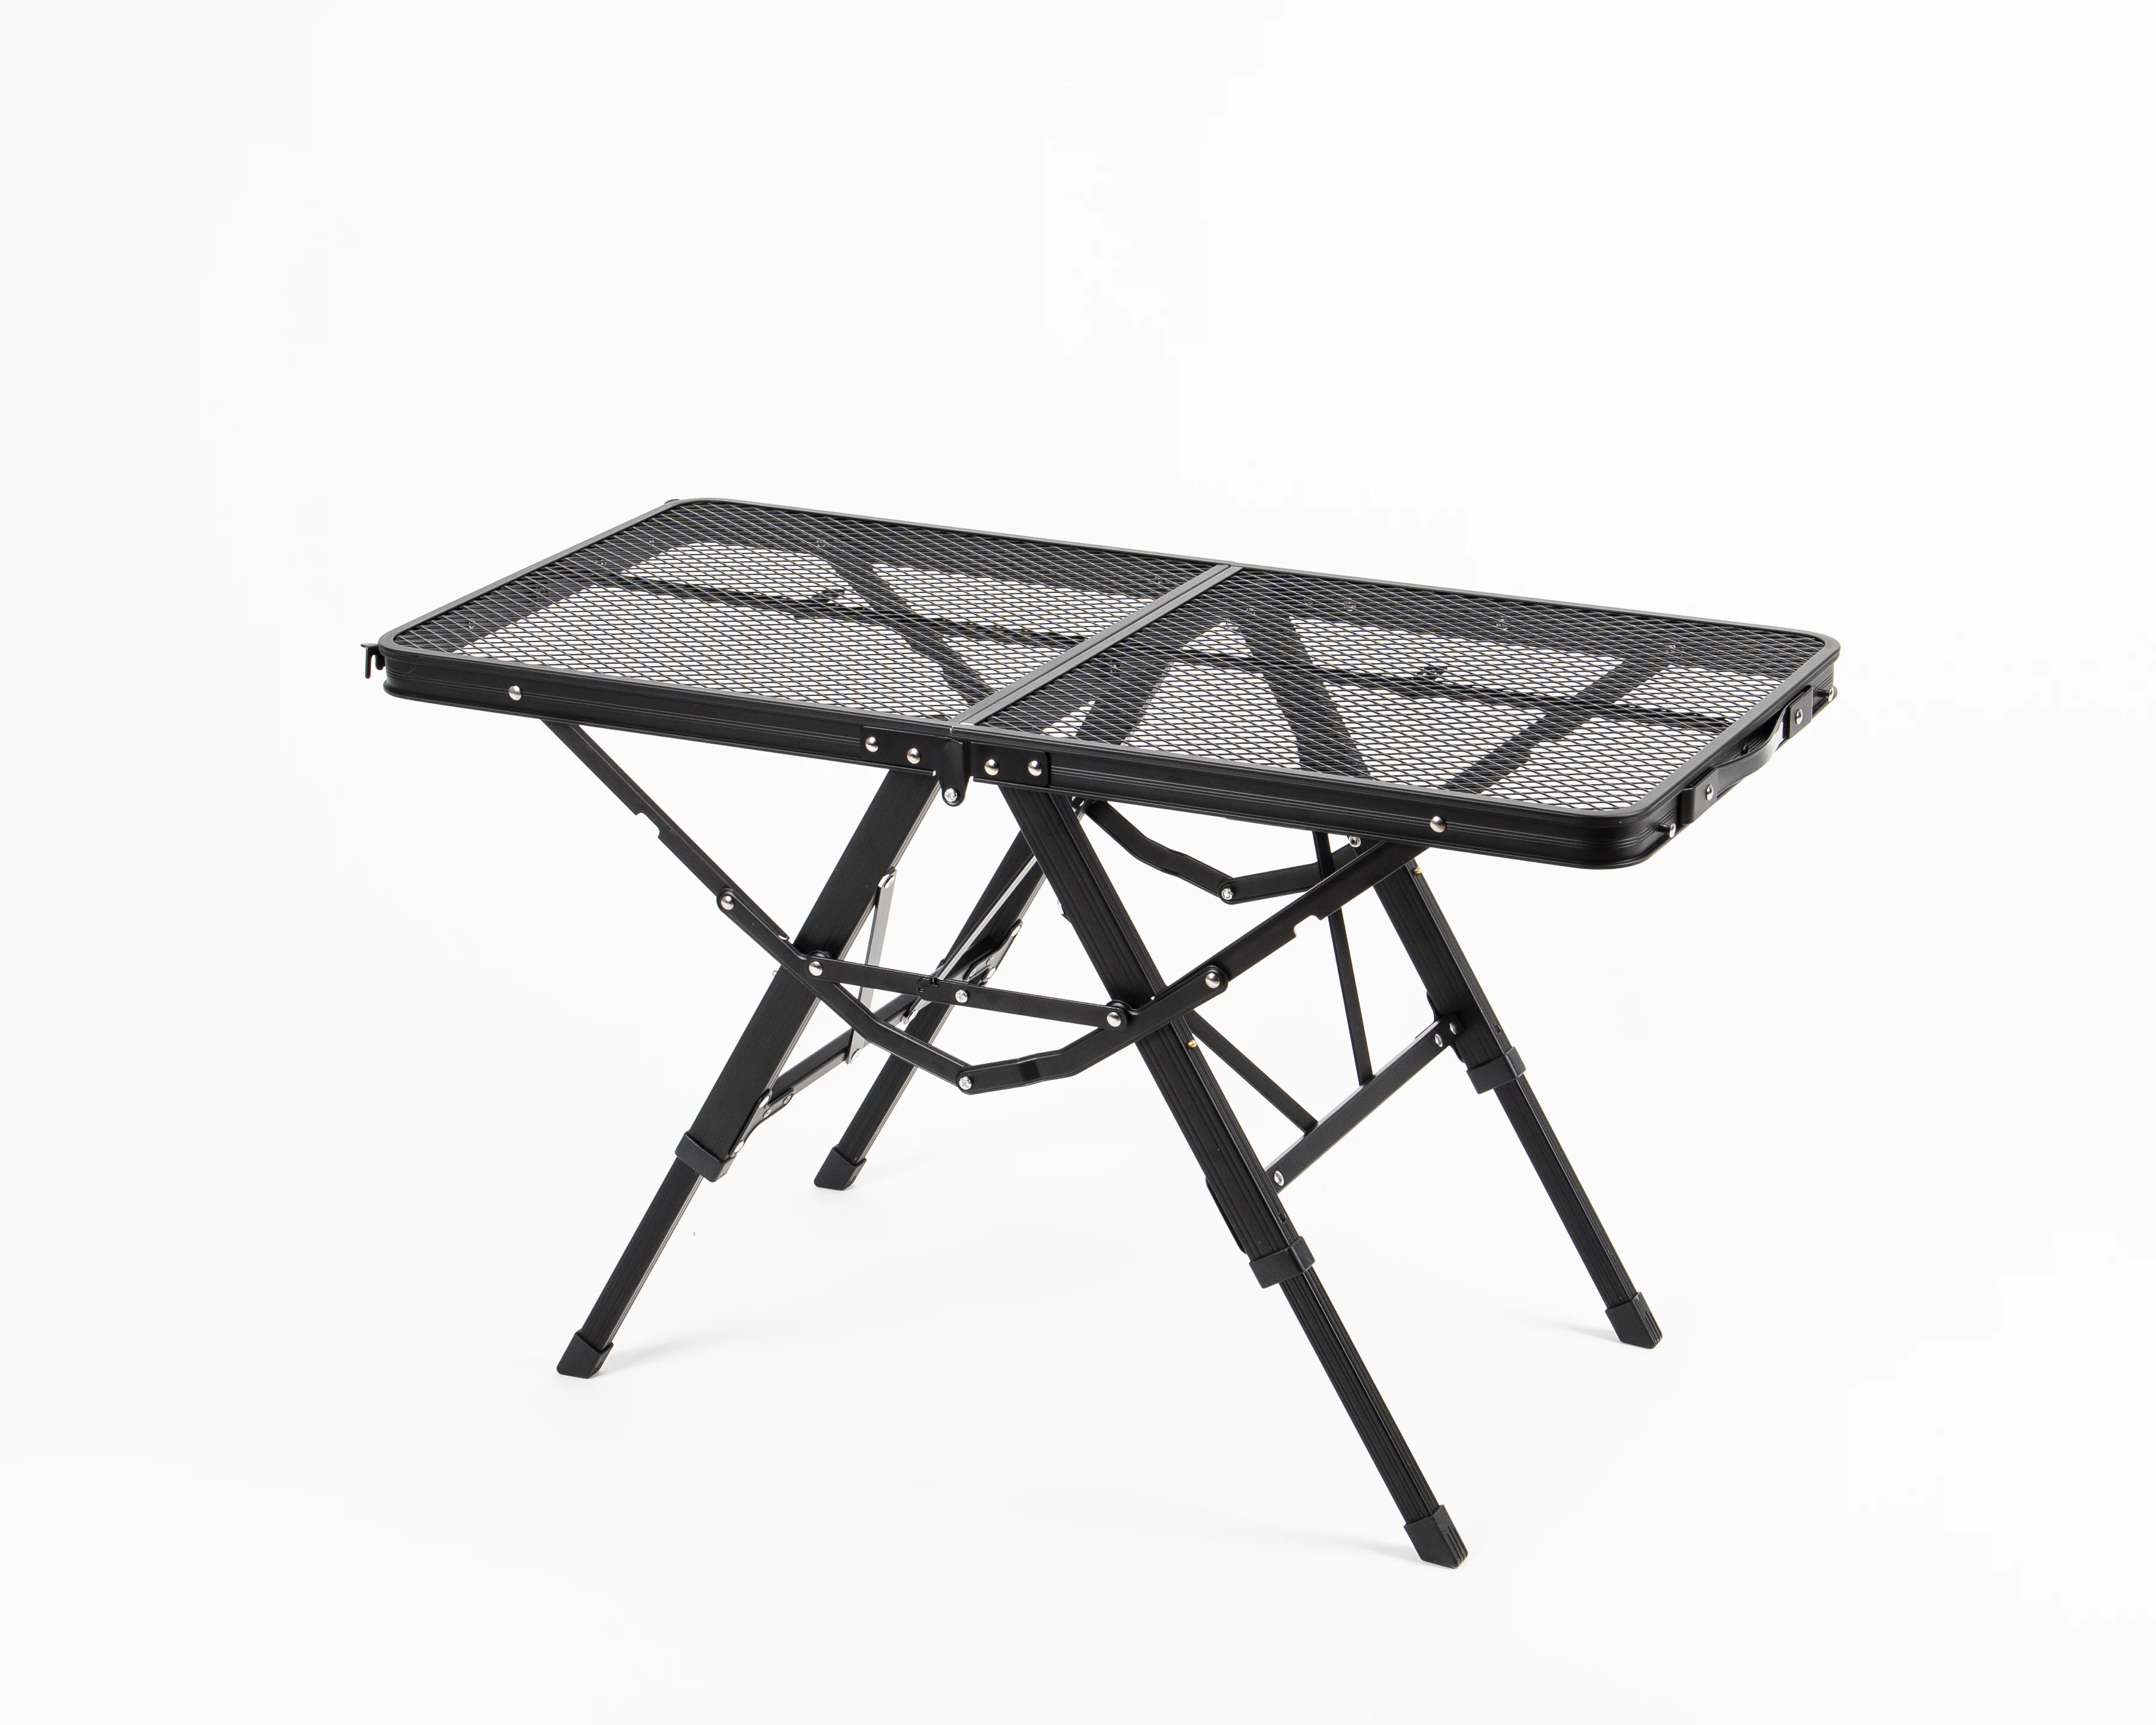 

New Arrival Folding Camping Table, Portable, Light Weight, Camping Barbecue Table for 6 to 8 People, Suitable for Camping